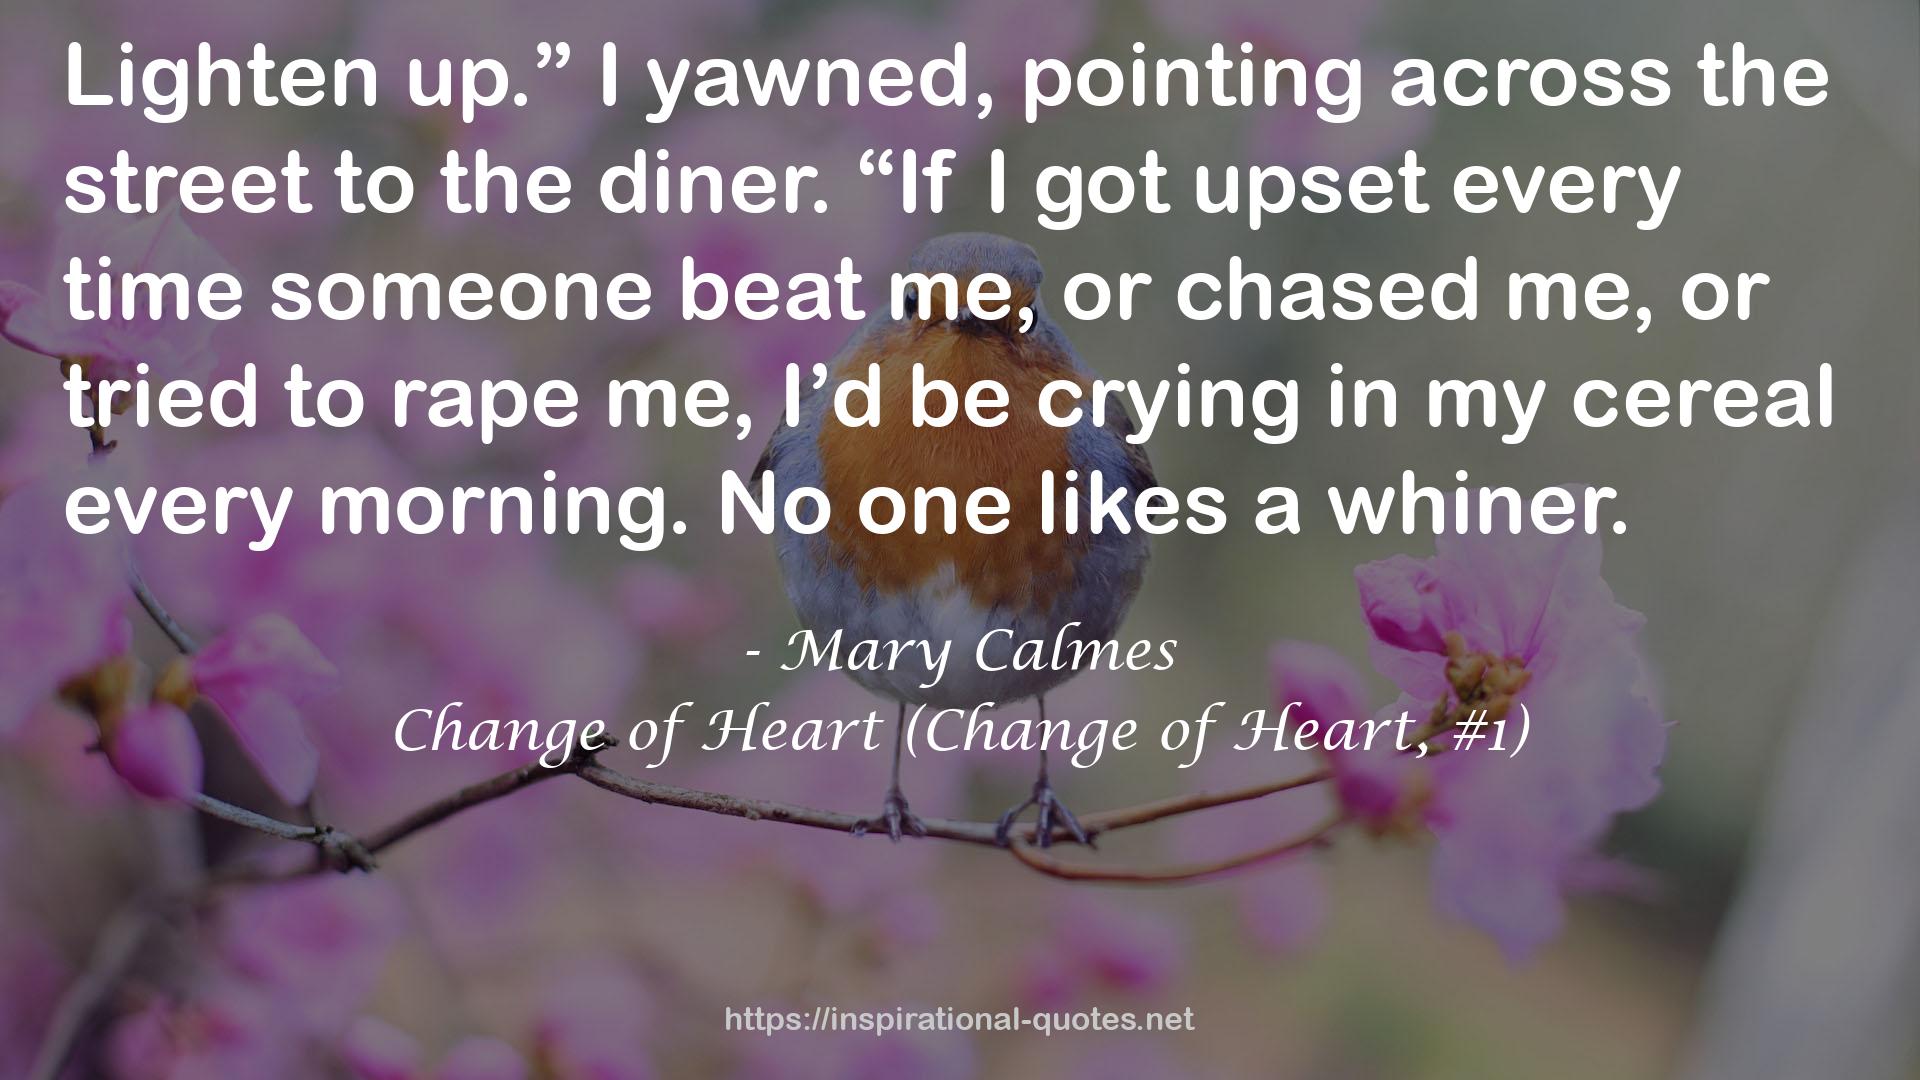 Change of Heart (Change of Heart, #1) QUOTES